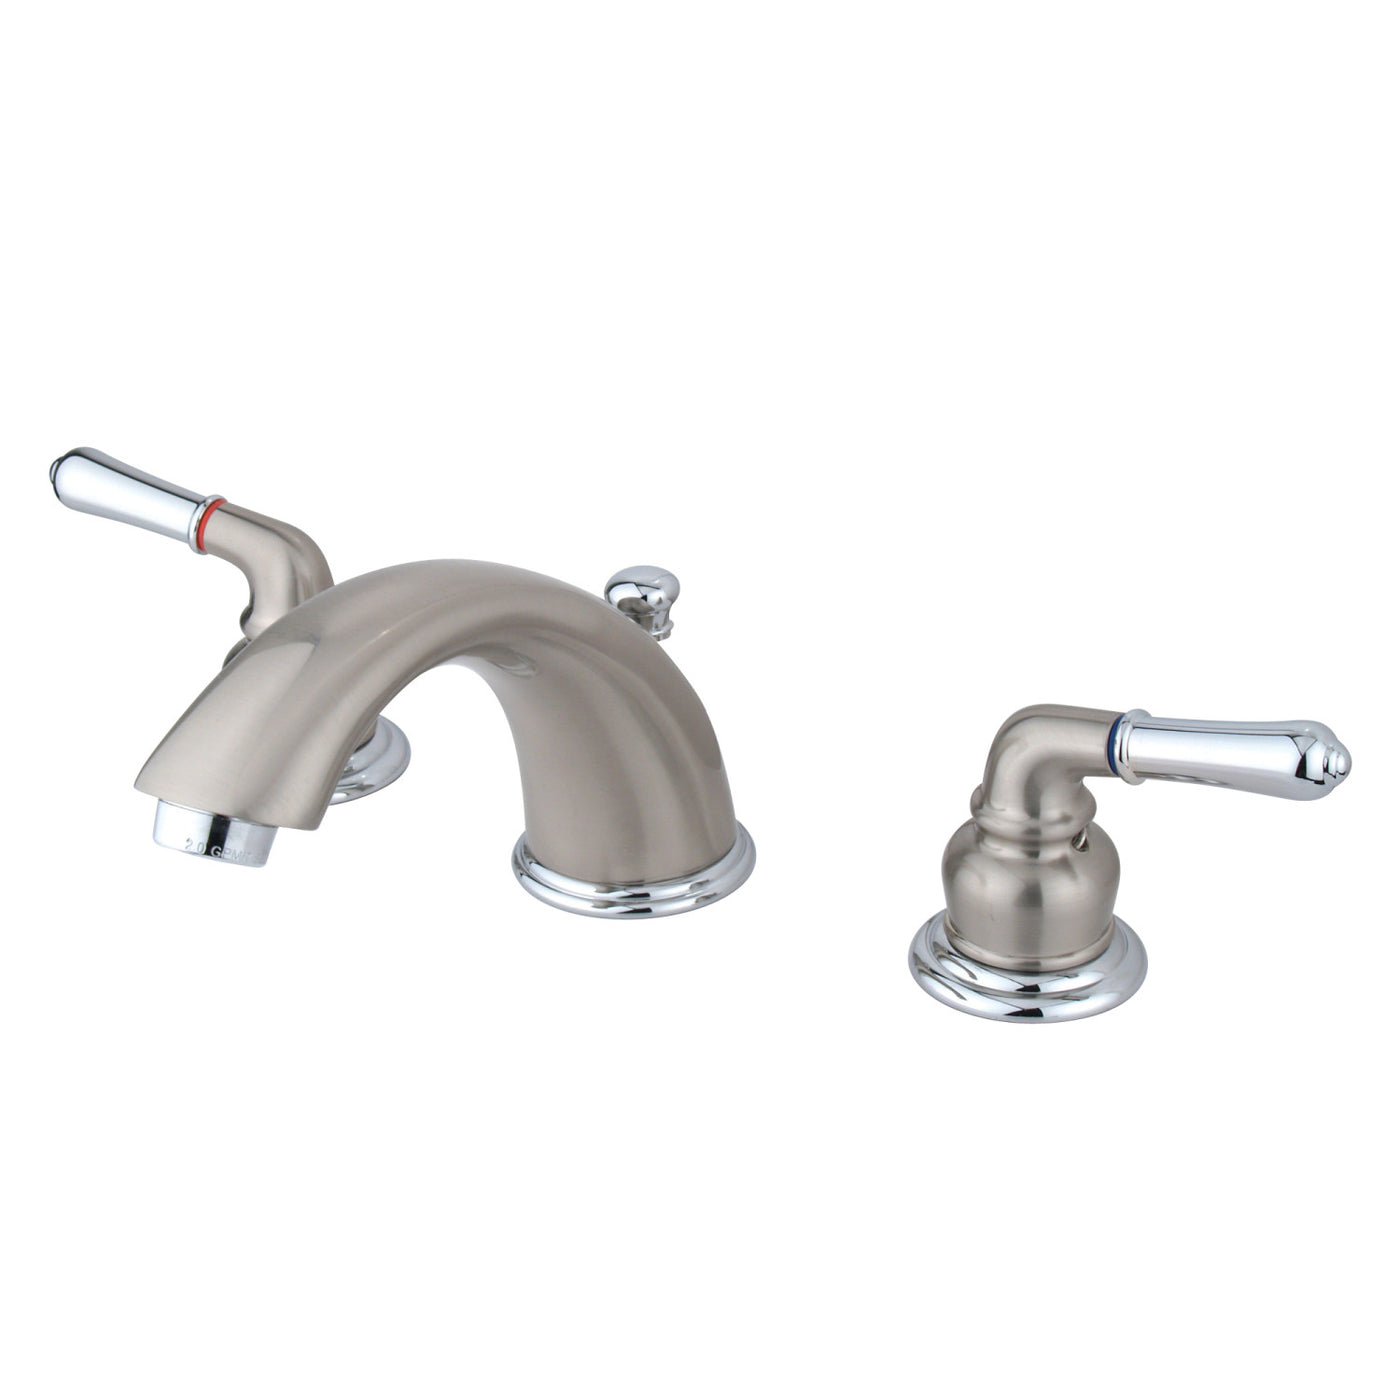 Elements of Design EB967 Widespread Bathroom Faucet with Retail Pop-Up, Brushed Nickel/Polished Chrome